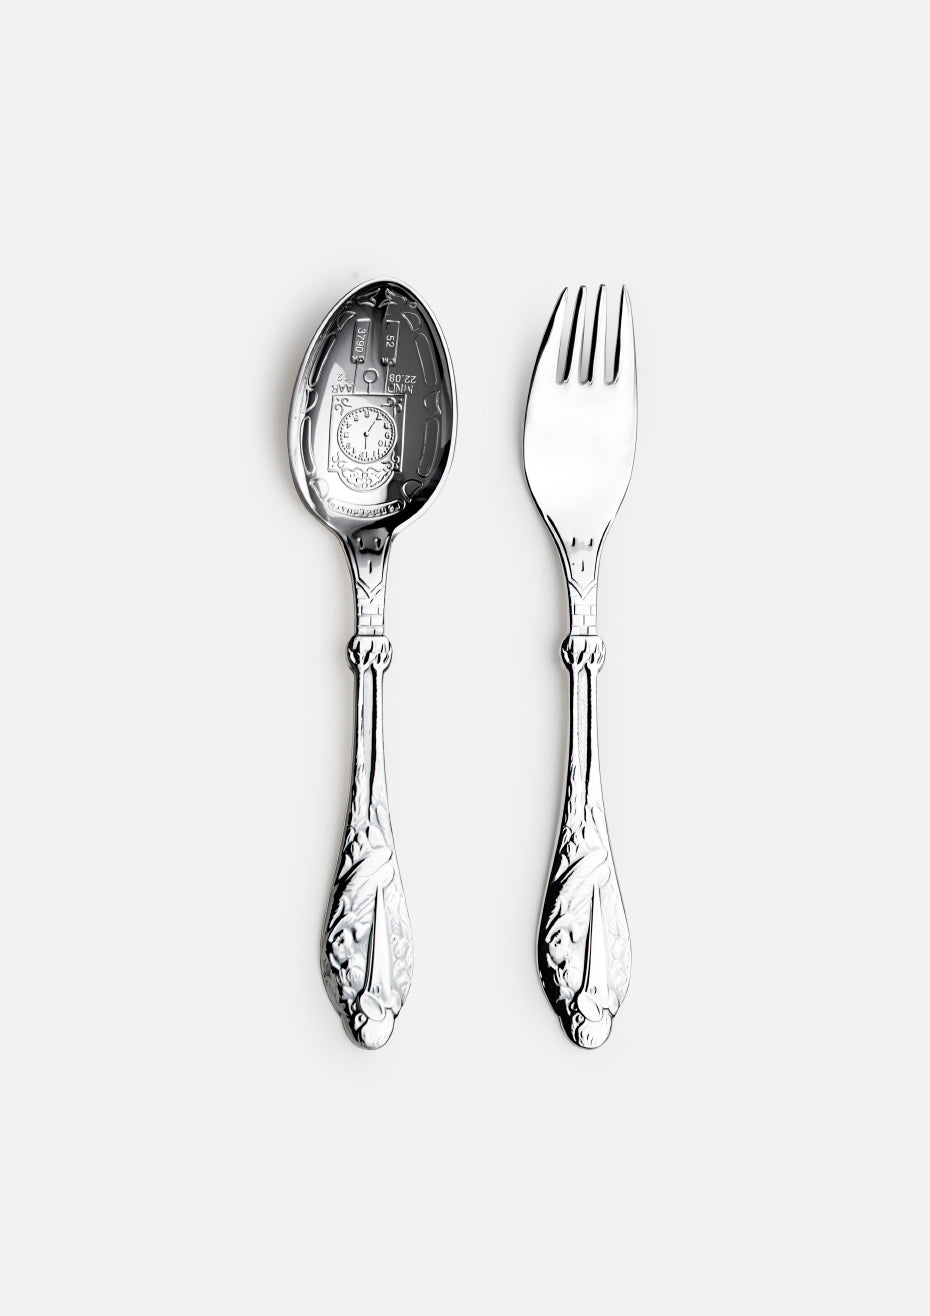 Stork spoon and fork set